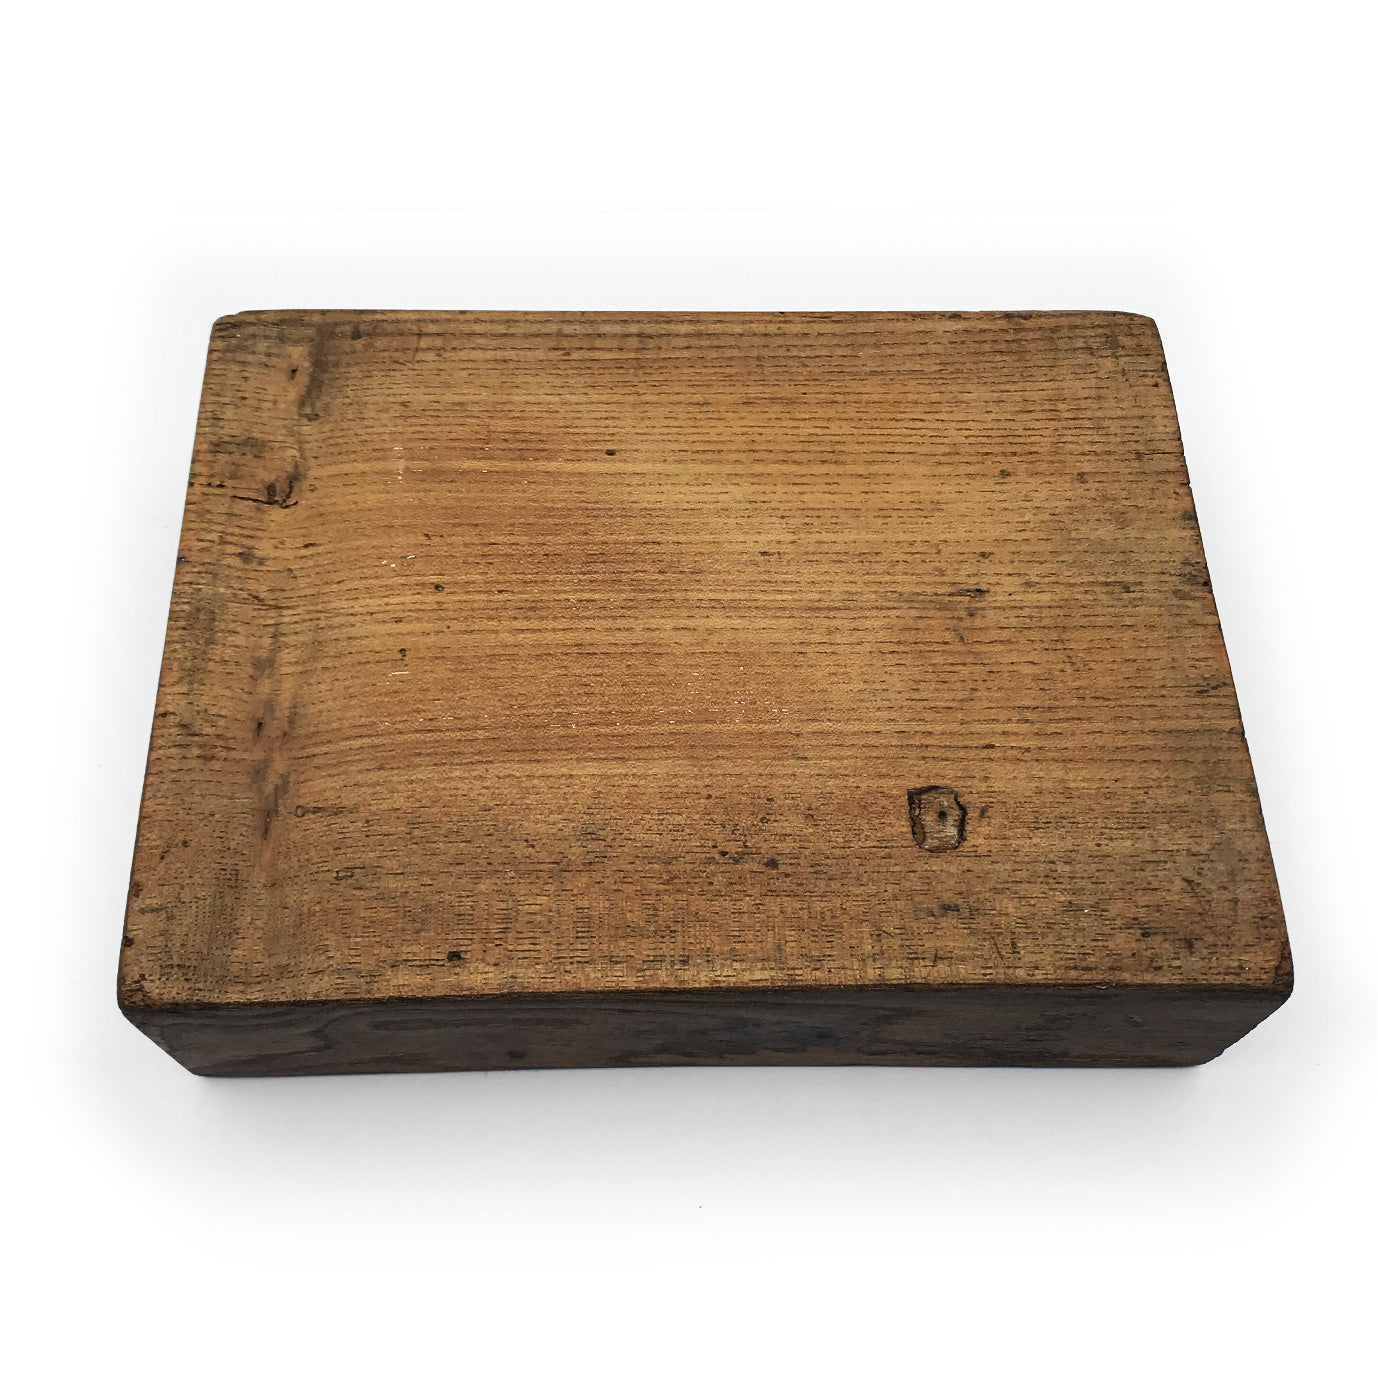 Antique Money Tray, made of solid oak, it has 3 deep bored bowls where money would have been kept. Used by shop keeps and market traders in the late 19th and early 20th century - SHOP NOW - www.intovintage.co.uk